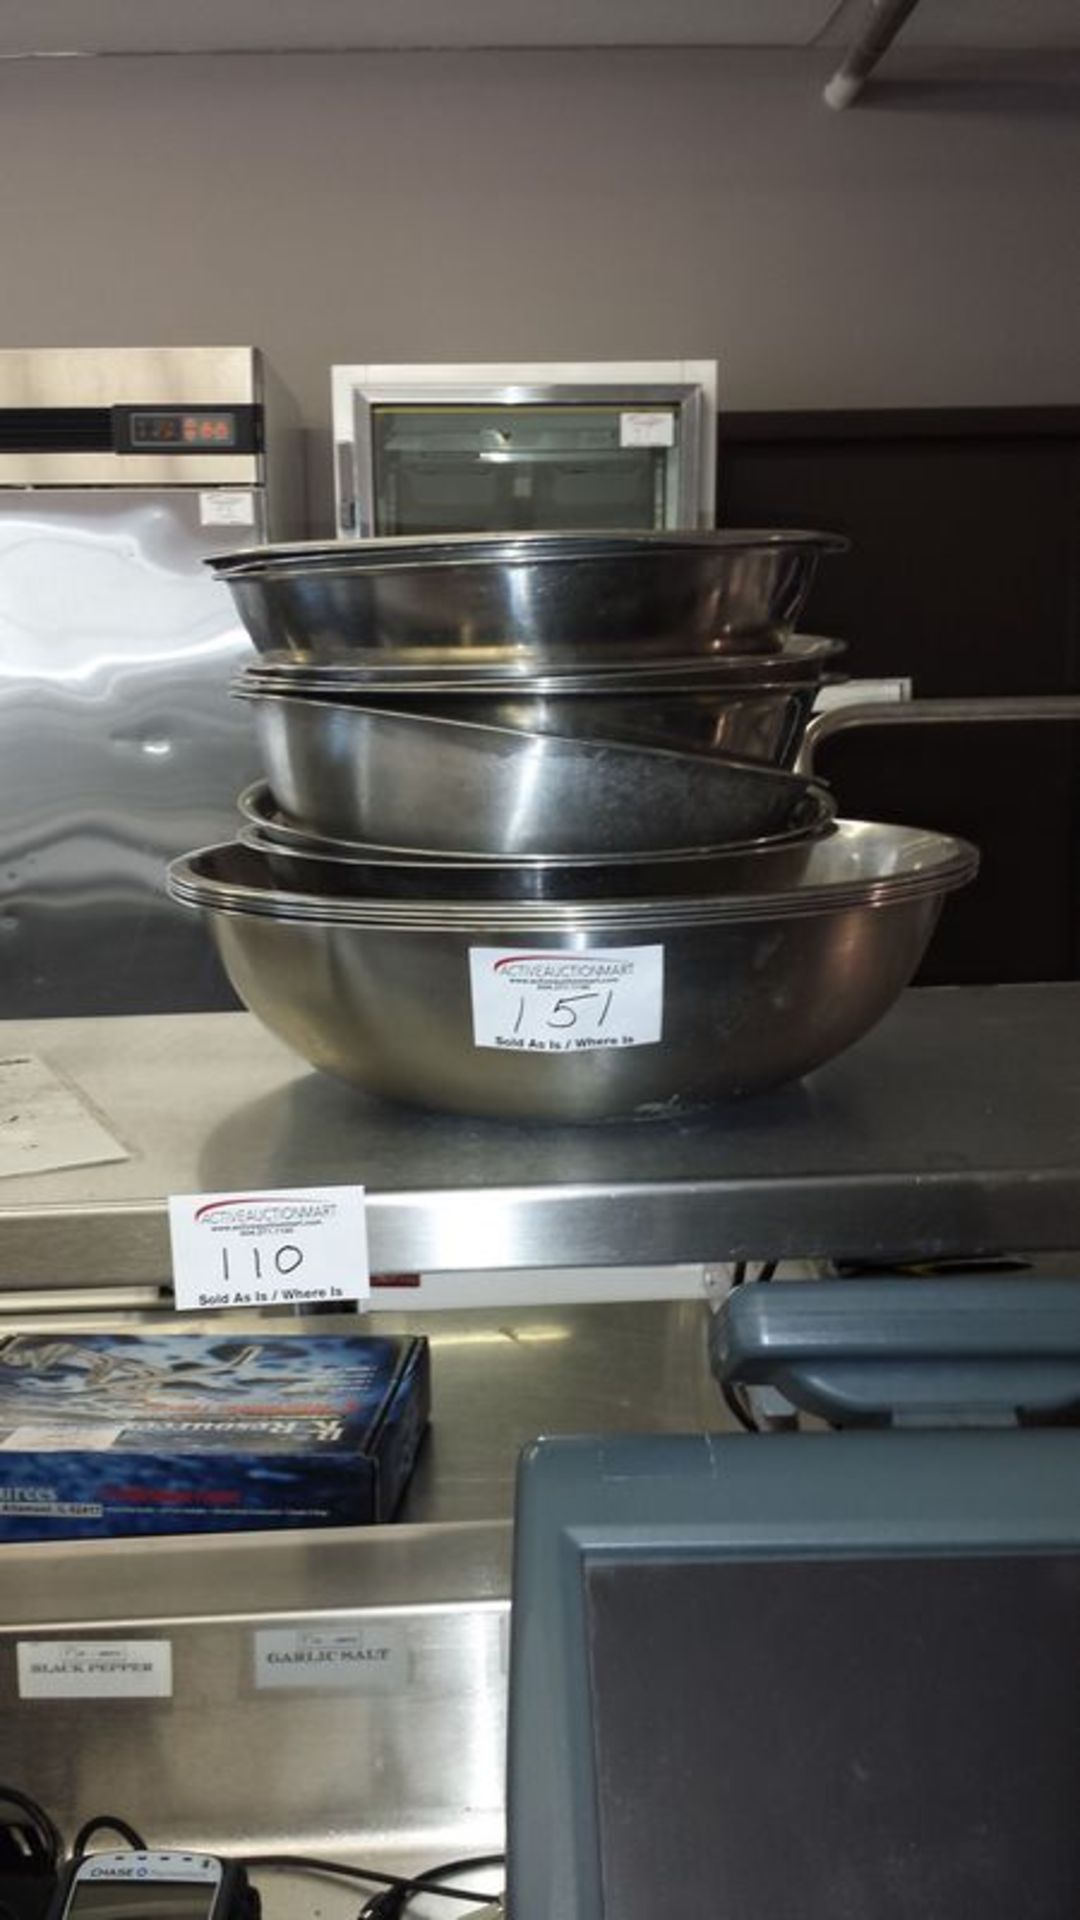 13 Stainless steel bowls